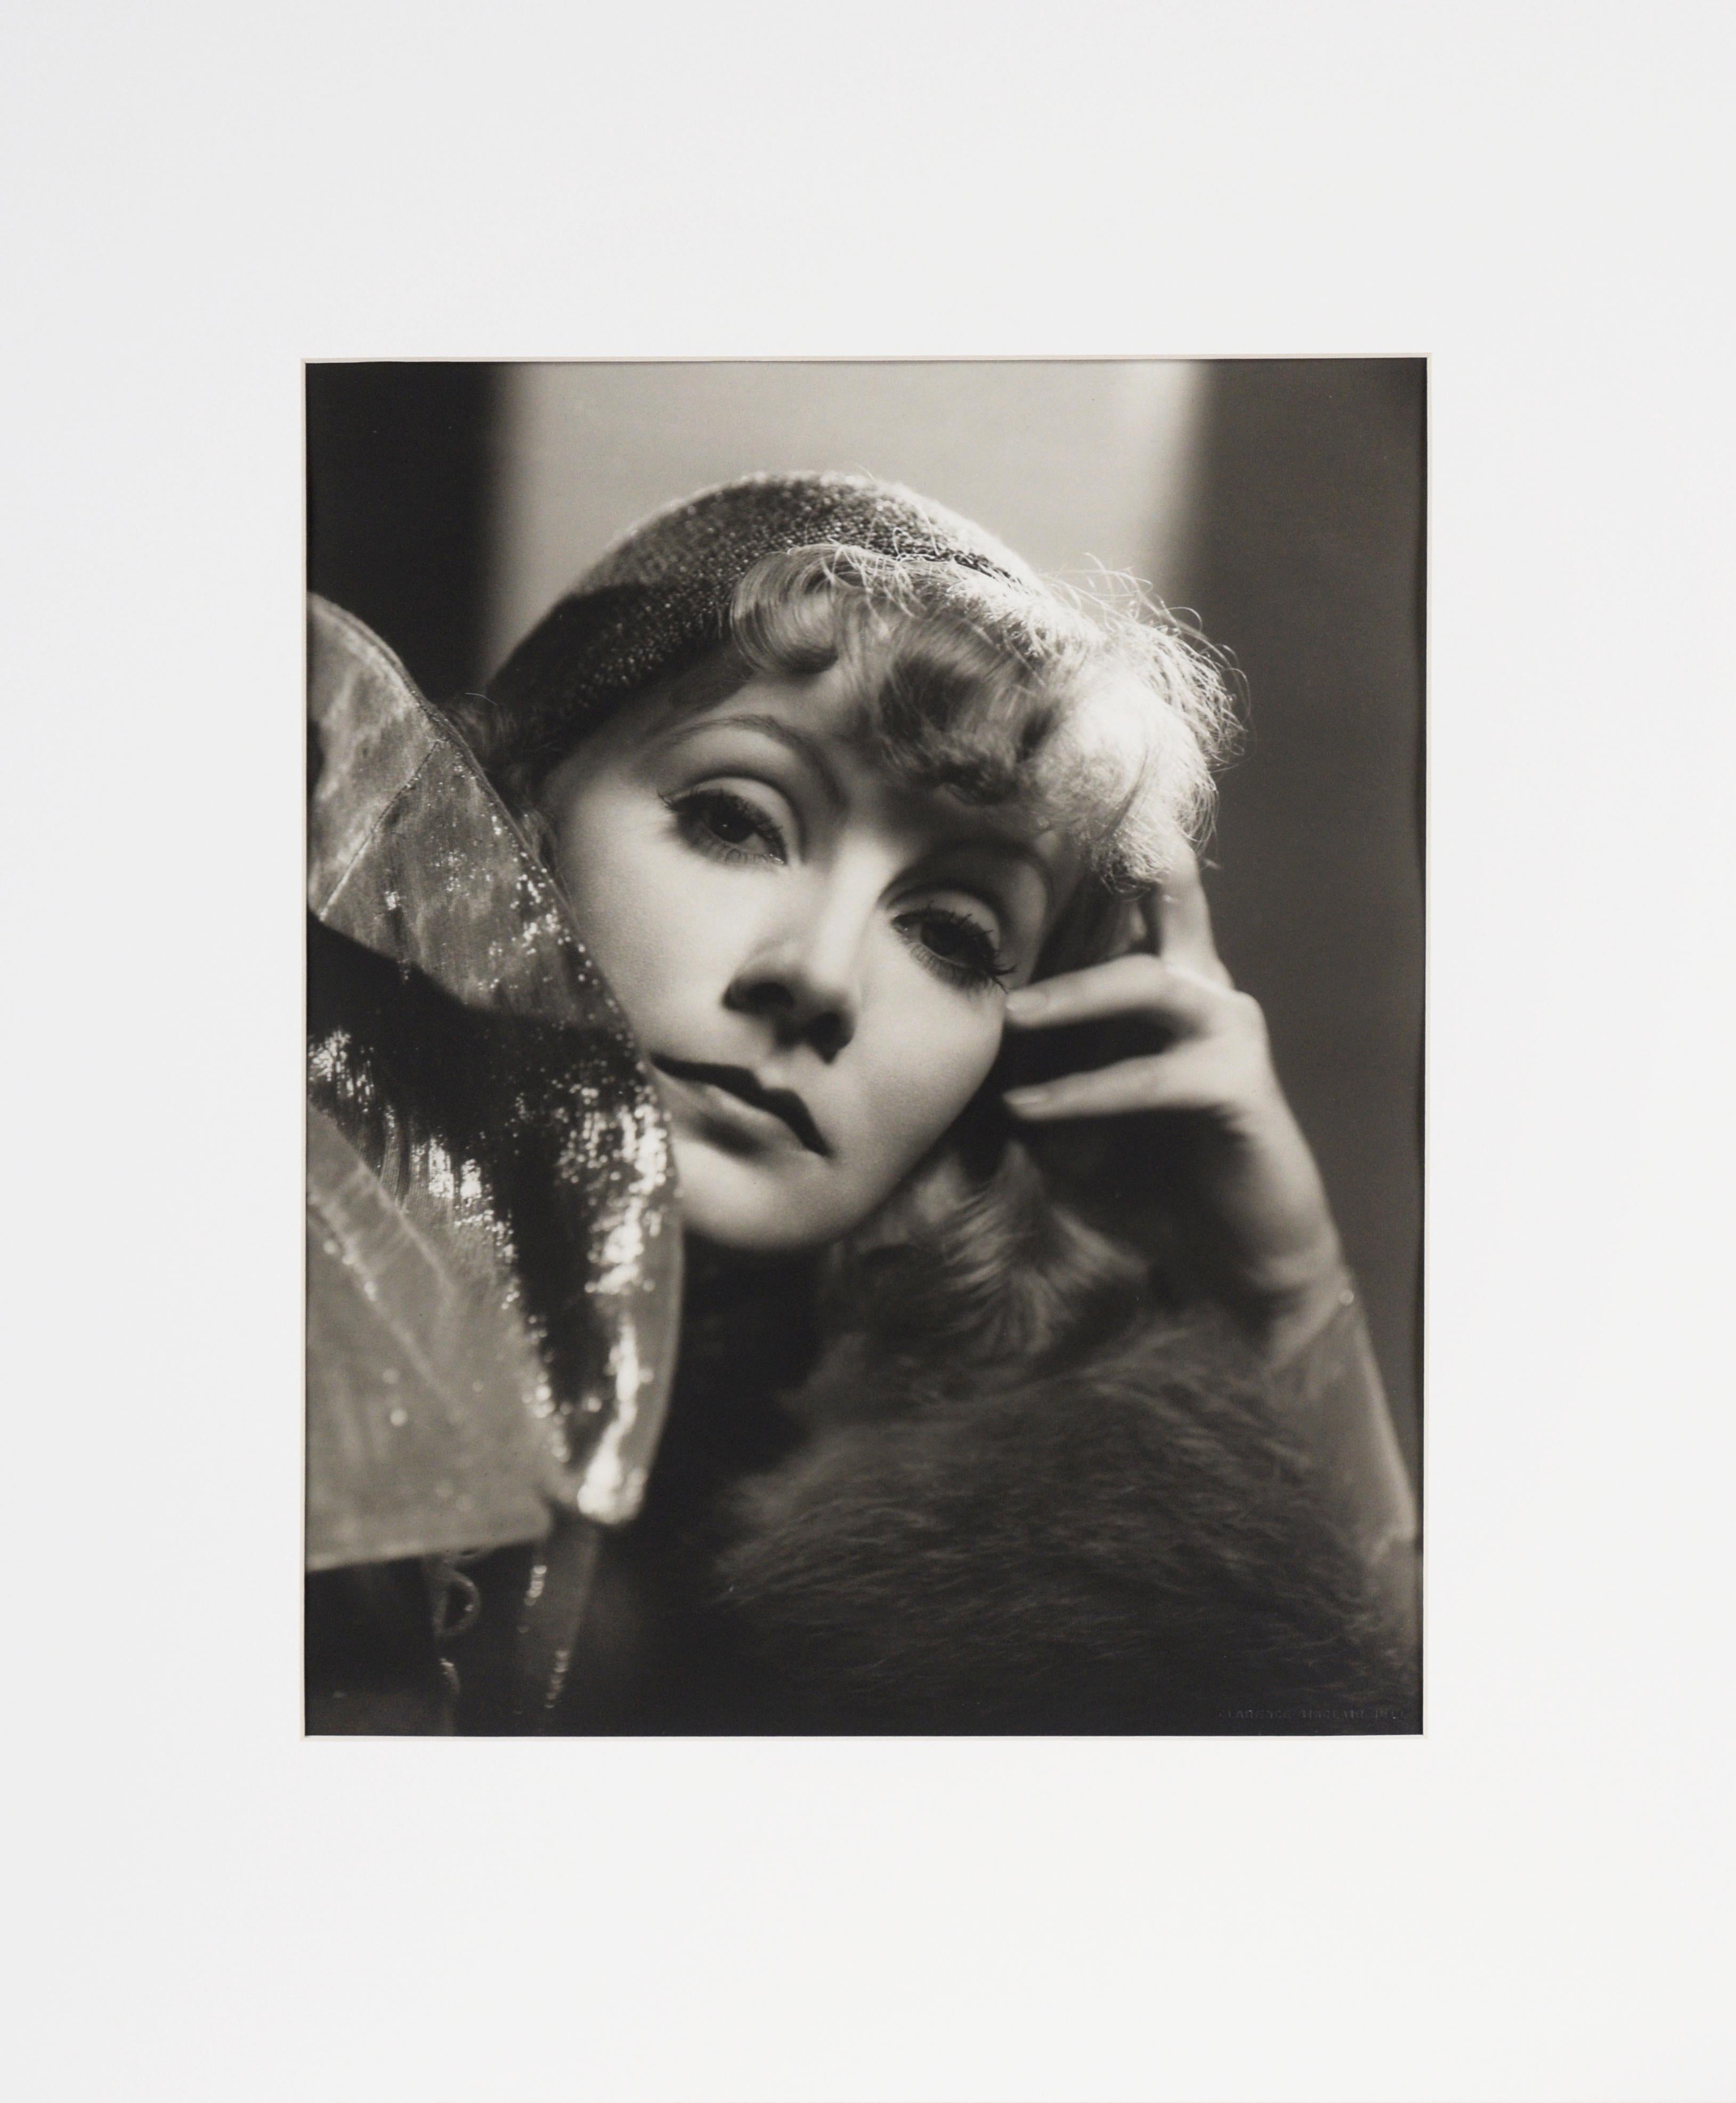 Clarence Sinclair Bull Portrait Photograph – Greta Garbo in Susan Lenox (Her Fall And Rise) – Fotografie von Clarence Sinclair